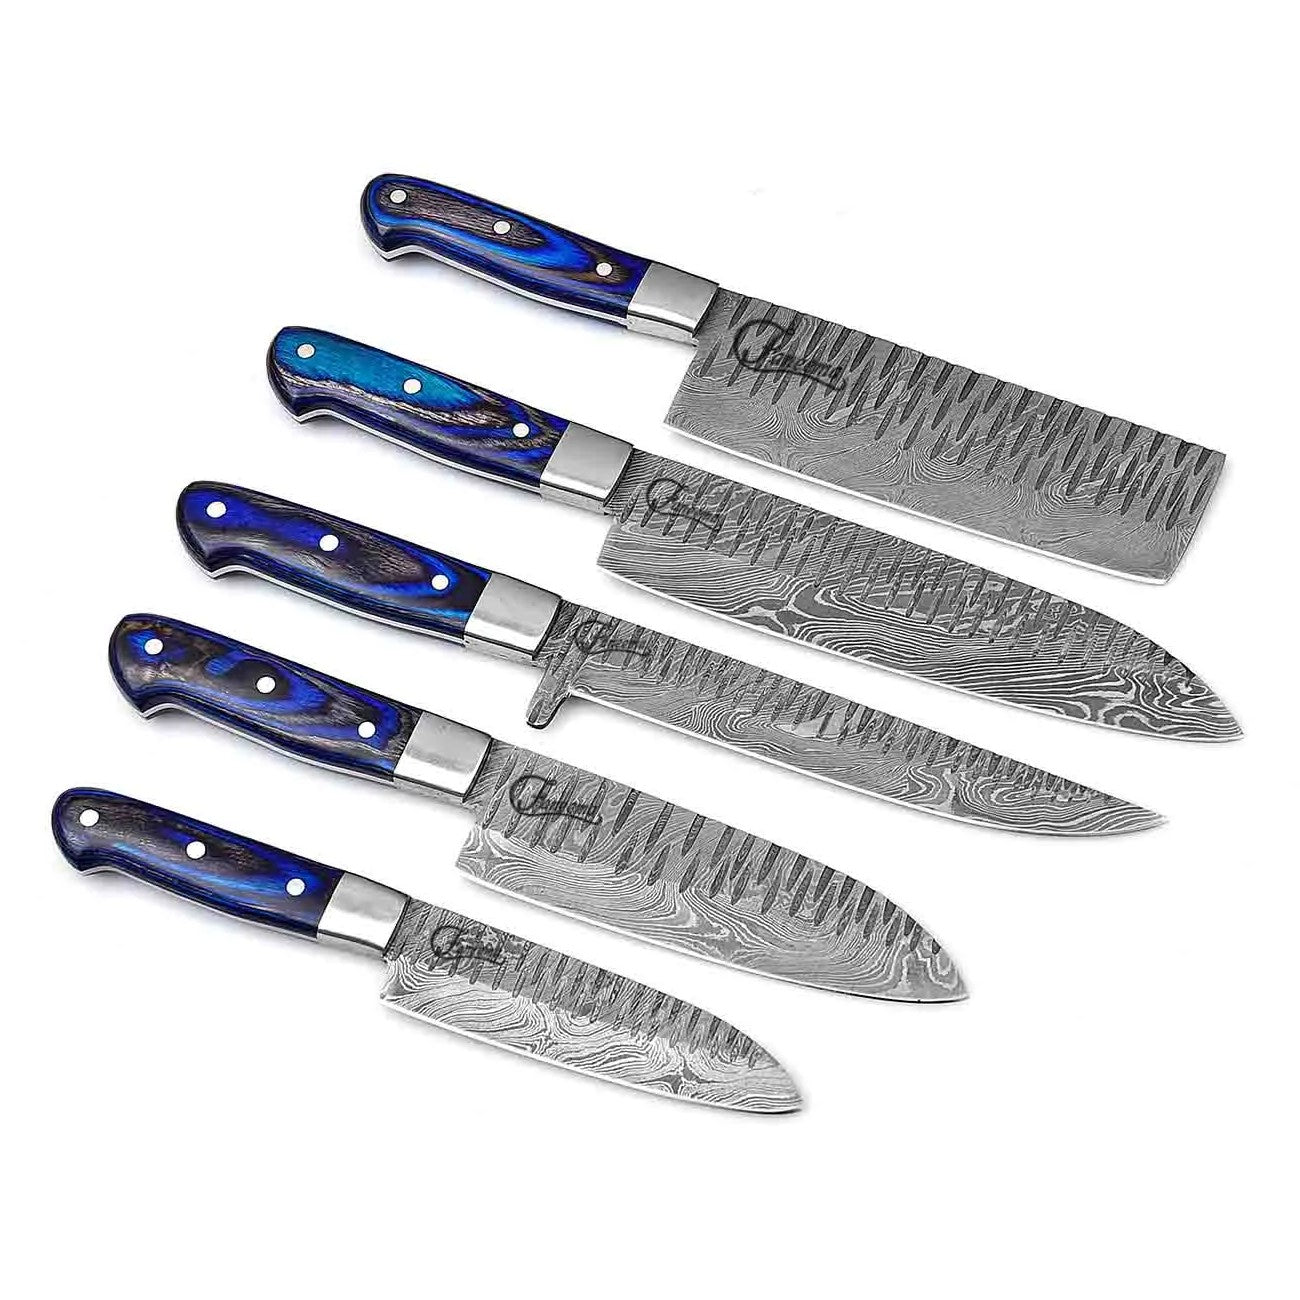 5-Piece Kitchen Knife Set With Dallas and 50 similar items